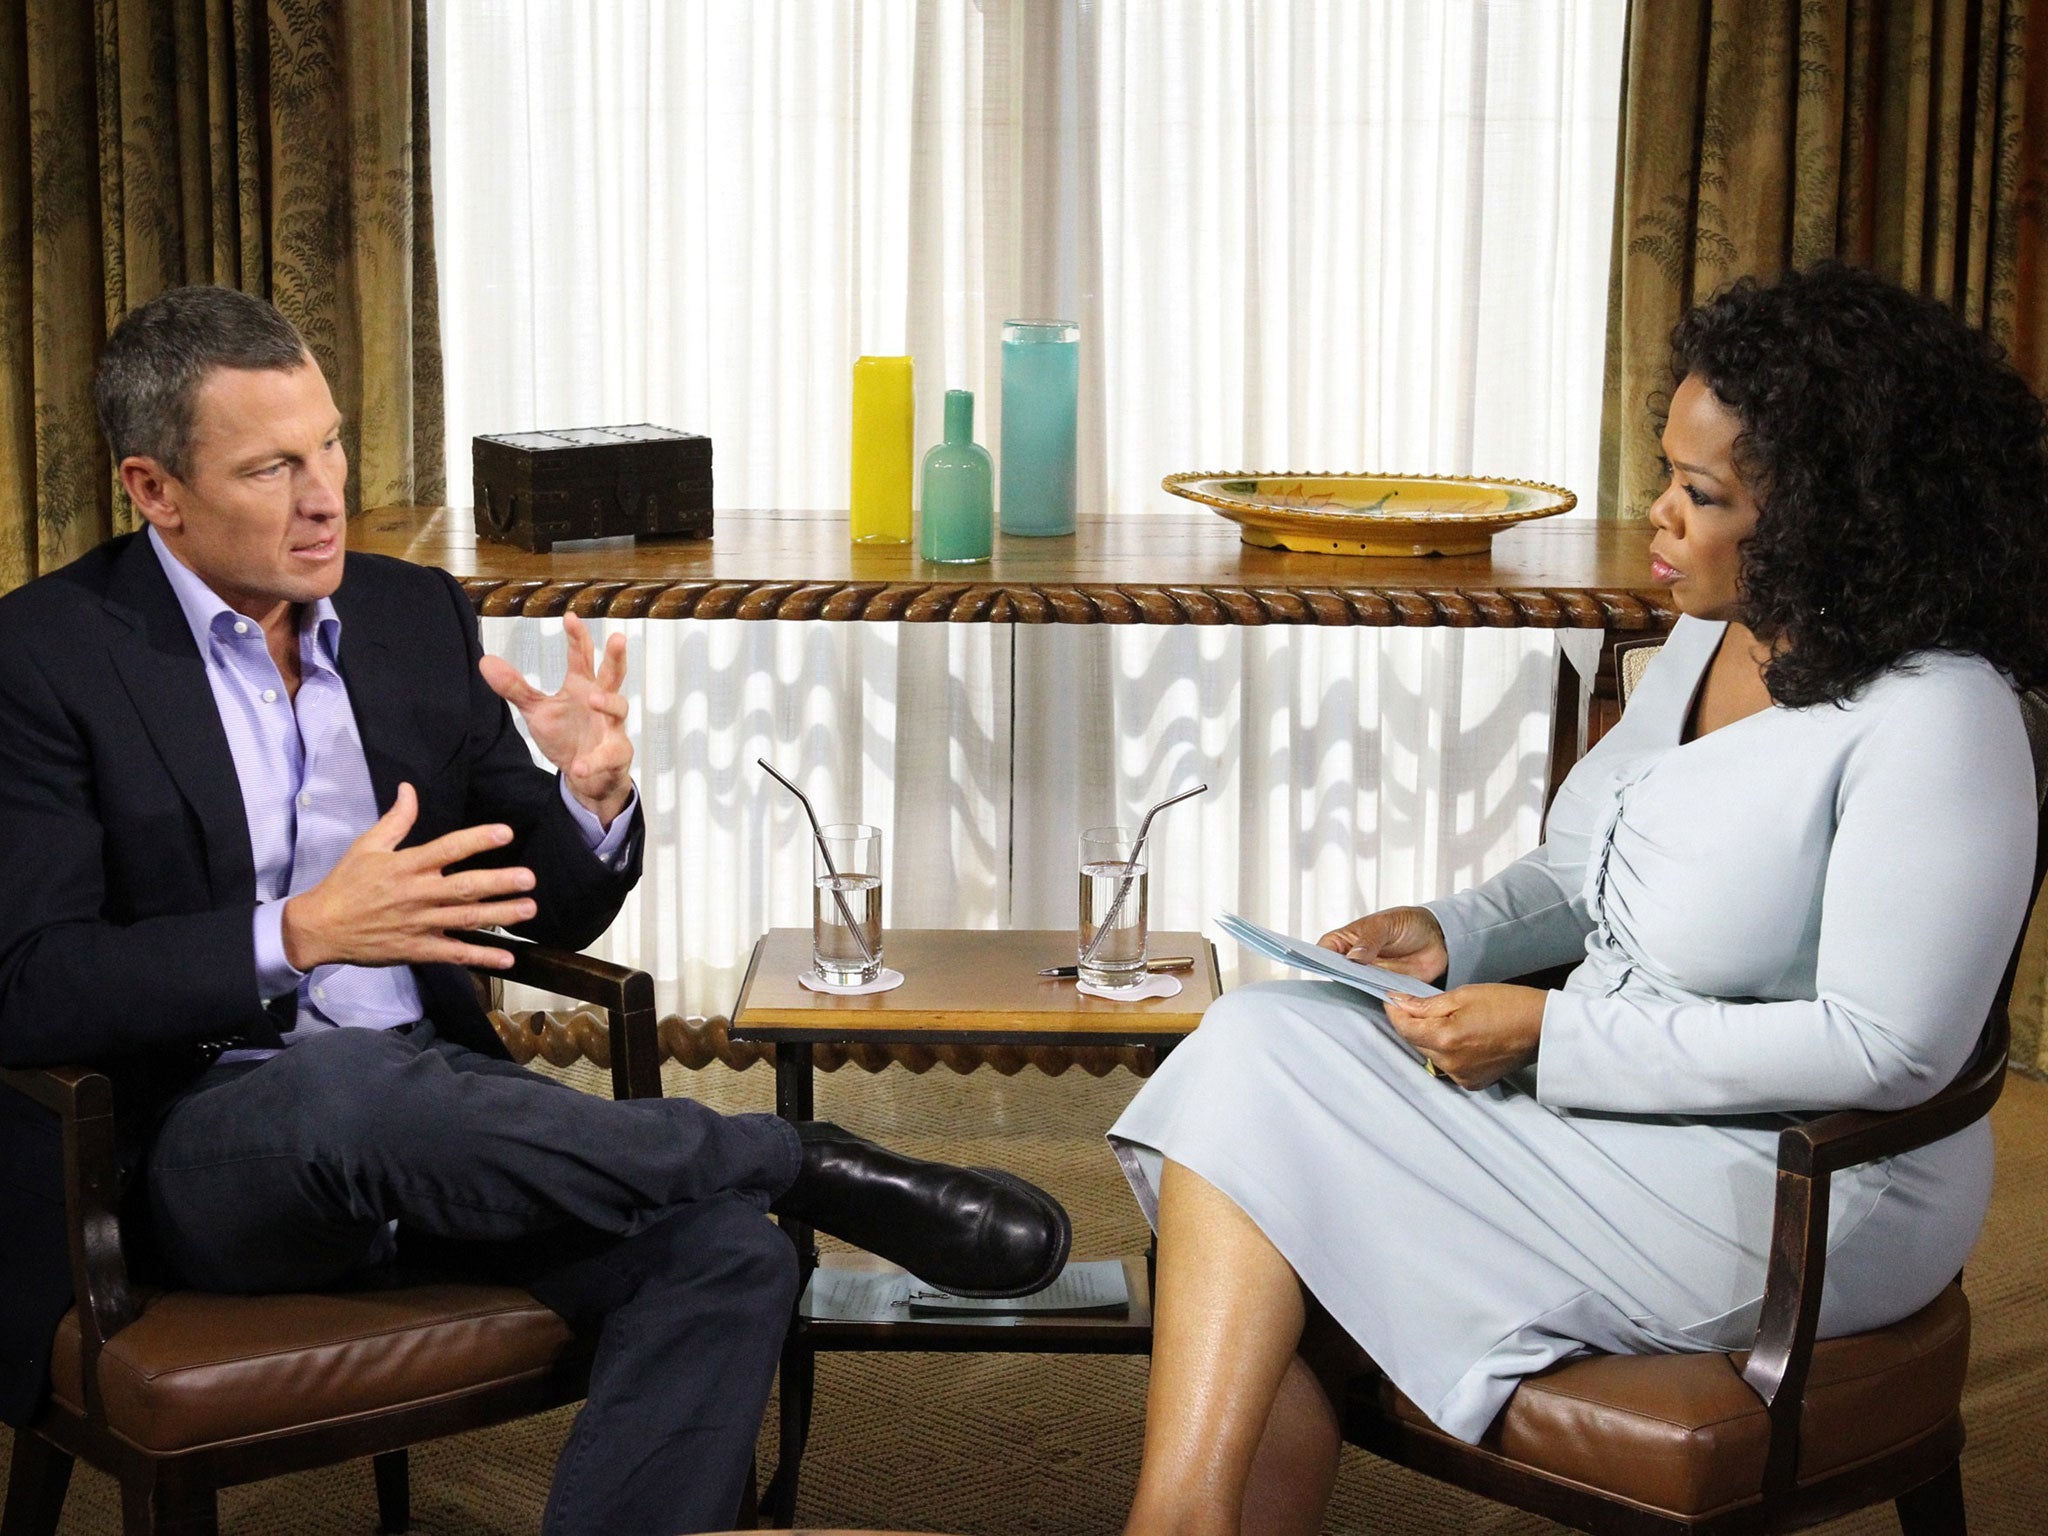 Armstrong used his interview with Oprah to open up about his doping